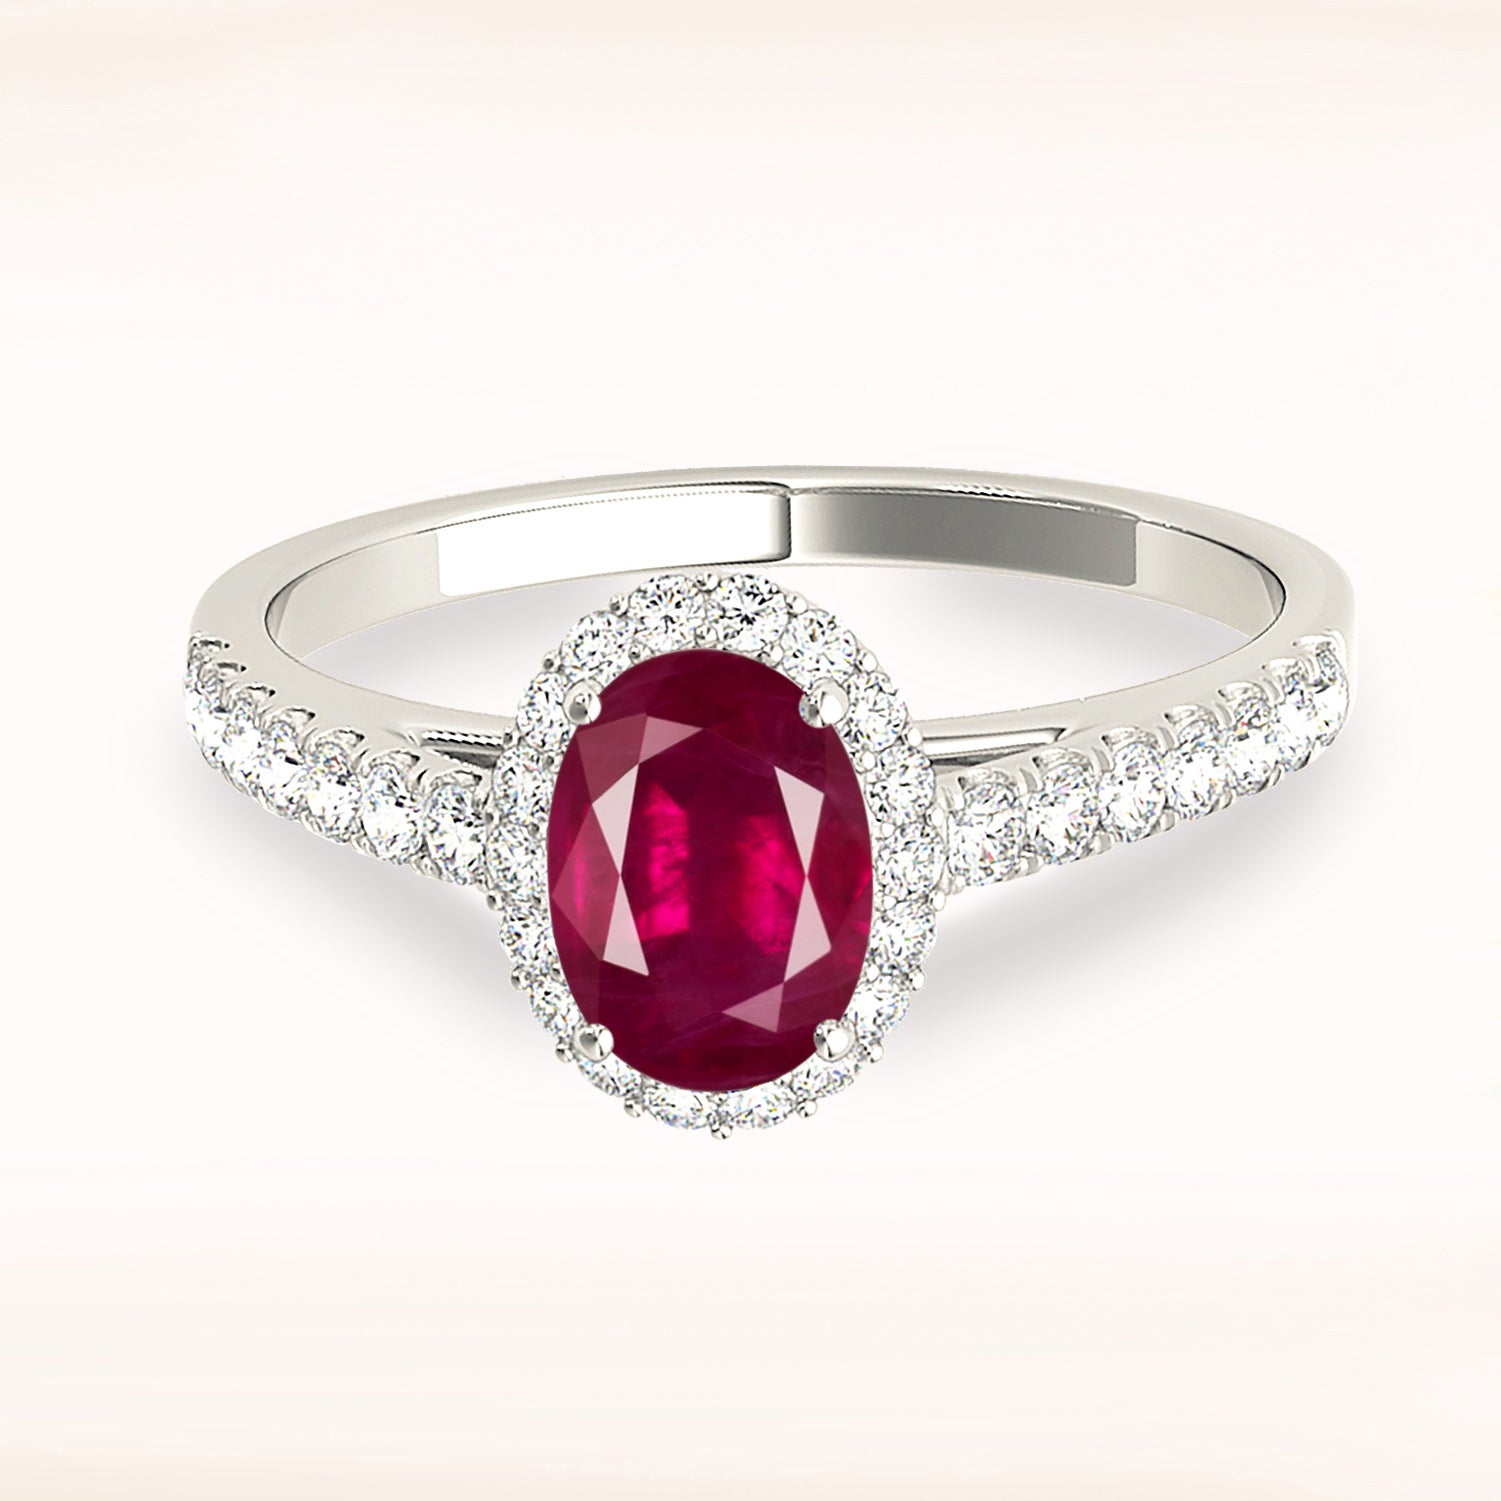 1.55 ct. Genuine Oval Ruby Ring With 0.25 ctw. Diamond Halo And Delicate Diamond Band-in 14K/18K White, Yellow, Rose Gold and Platinum - Christmas Jewelry Gift -VIRABYANI